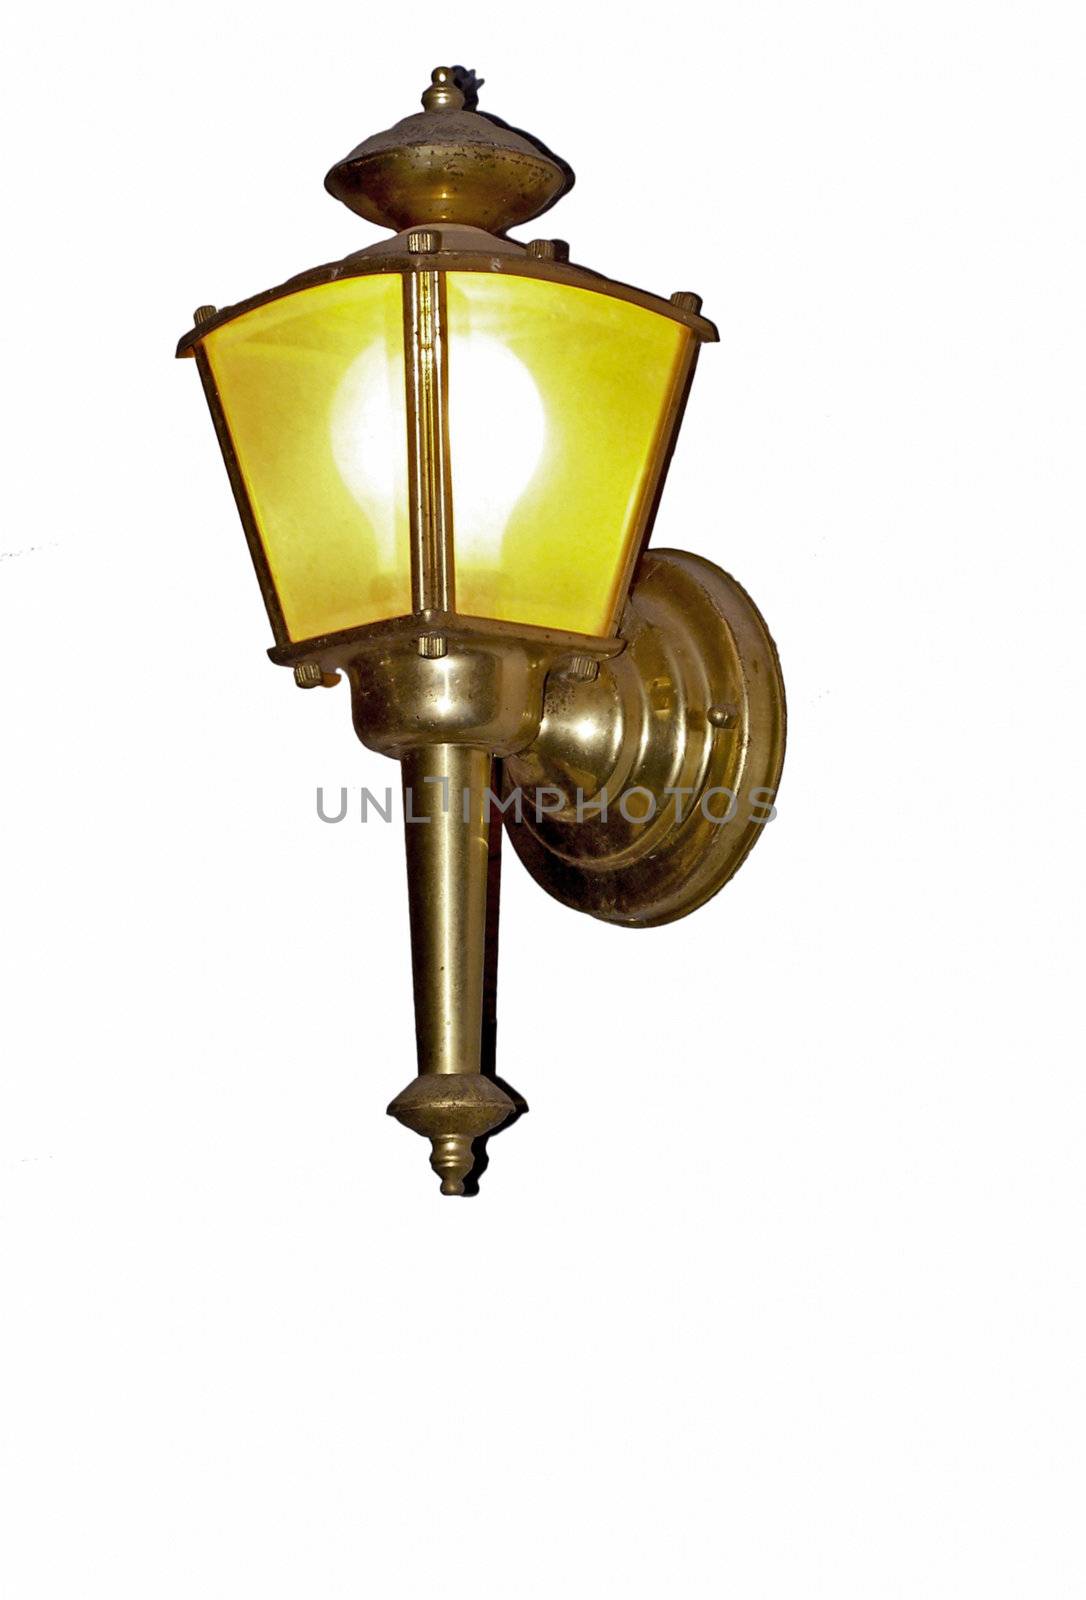 Lighted porch light isolated on a white background.